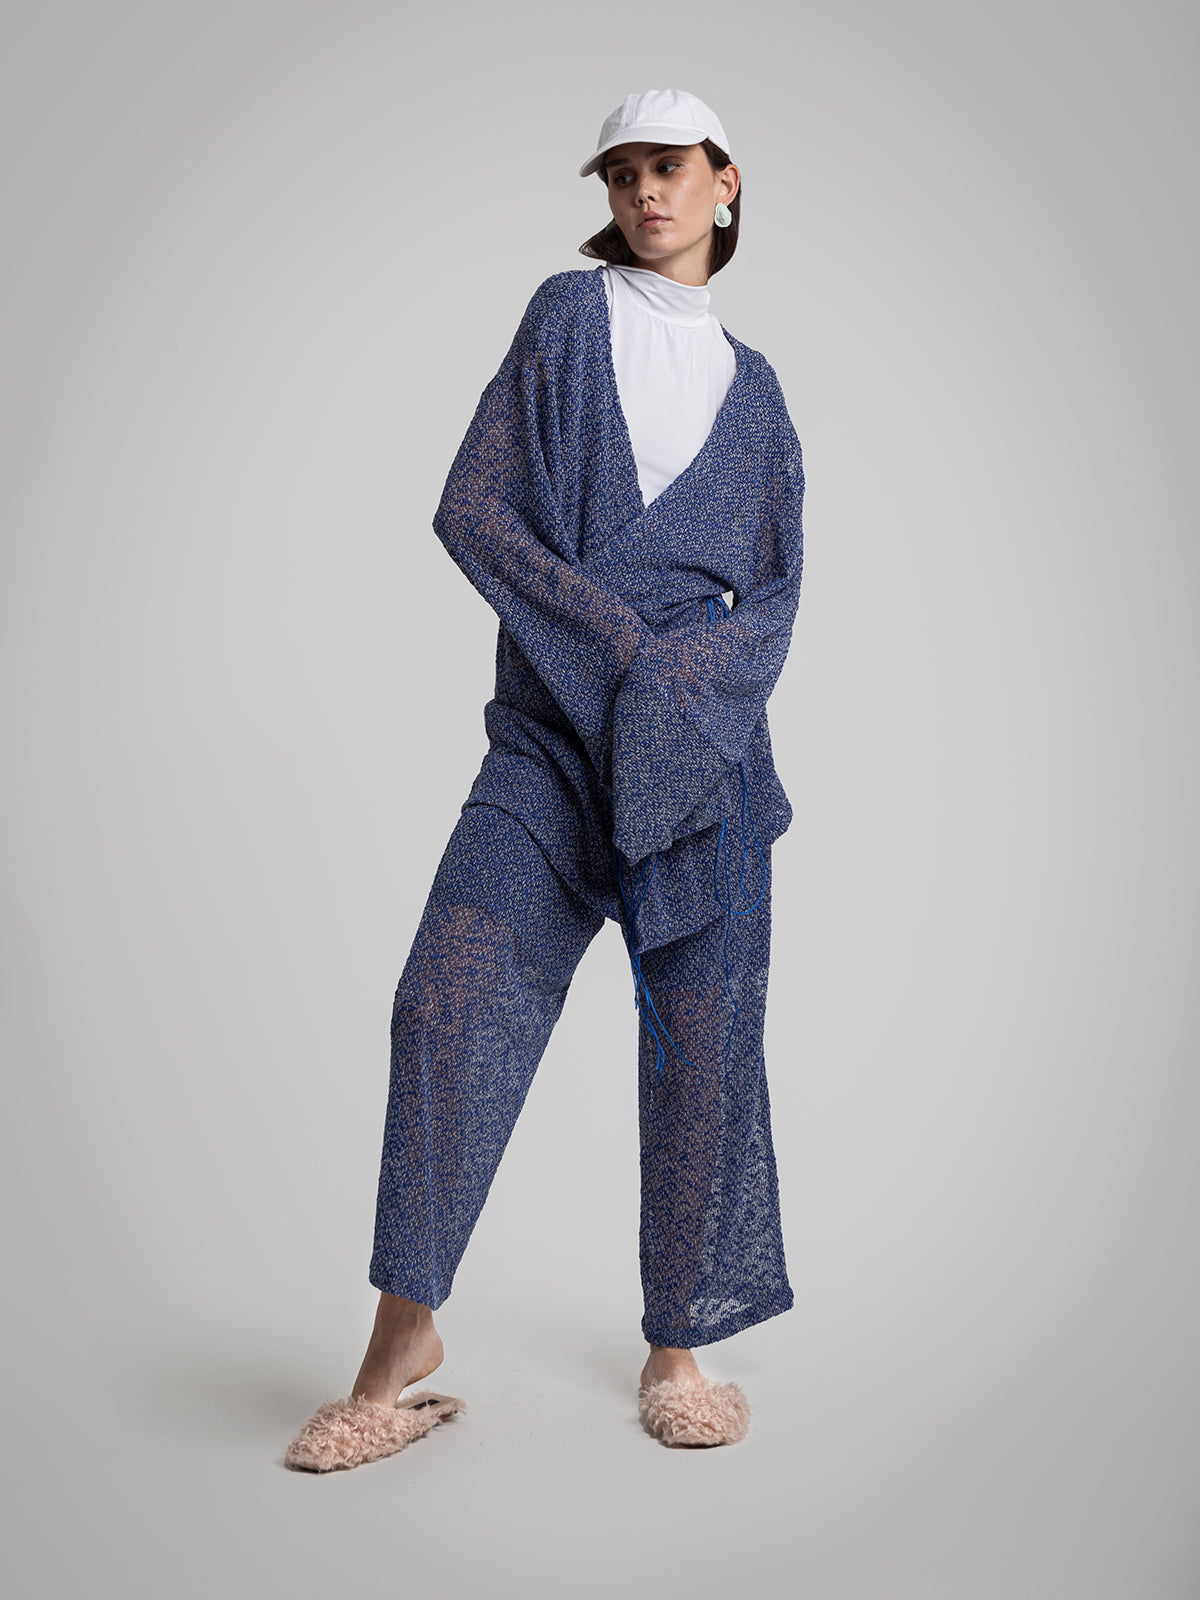 CITY LEGACY 2.0 OVERLAPPING KNITTED KIMONO DRESS - blue